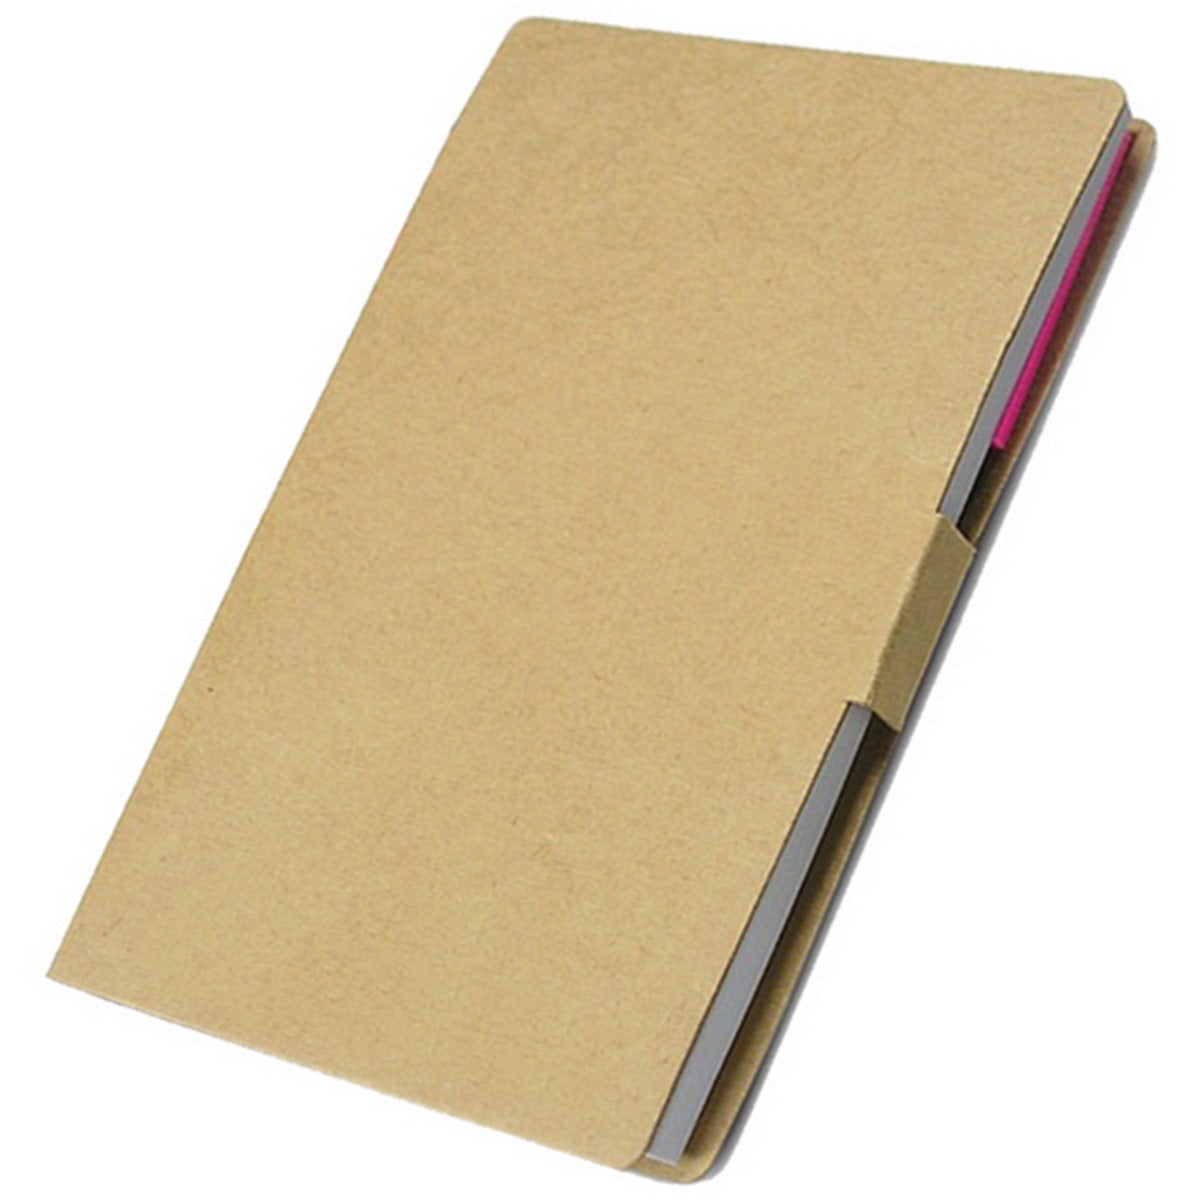 jags-mumbai Sticky Notes Memo Pad with pen and sticky notes. (Easy to carry & fold)